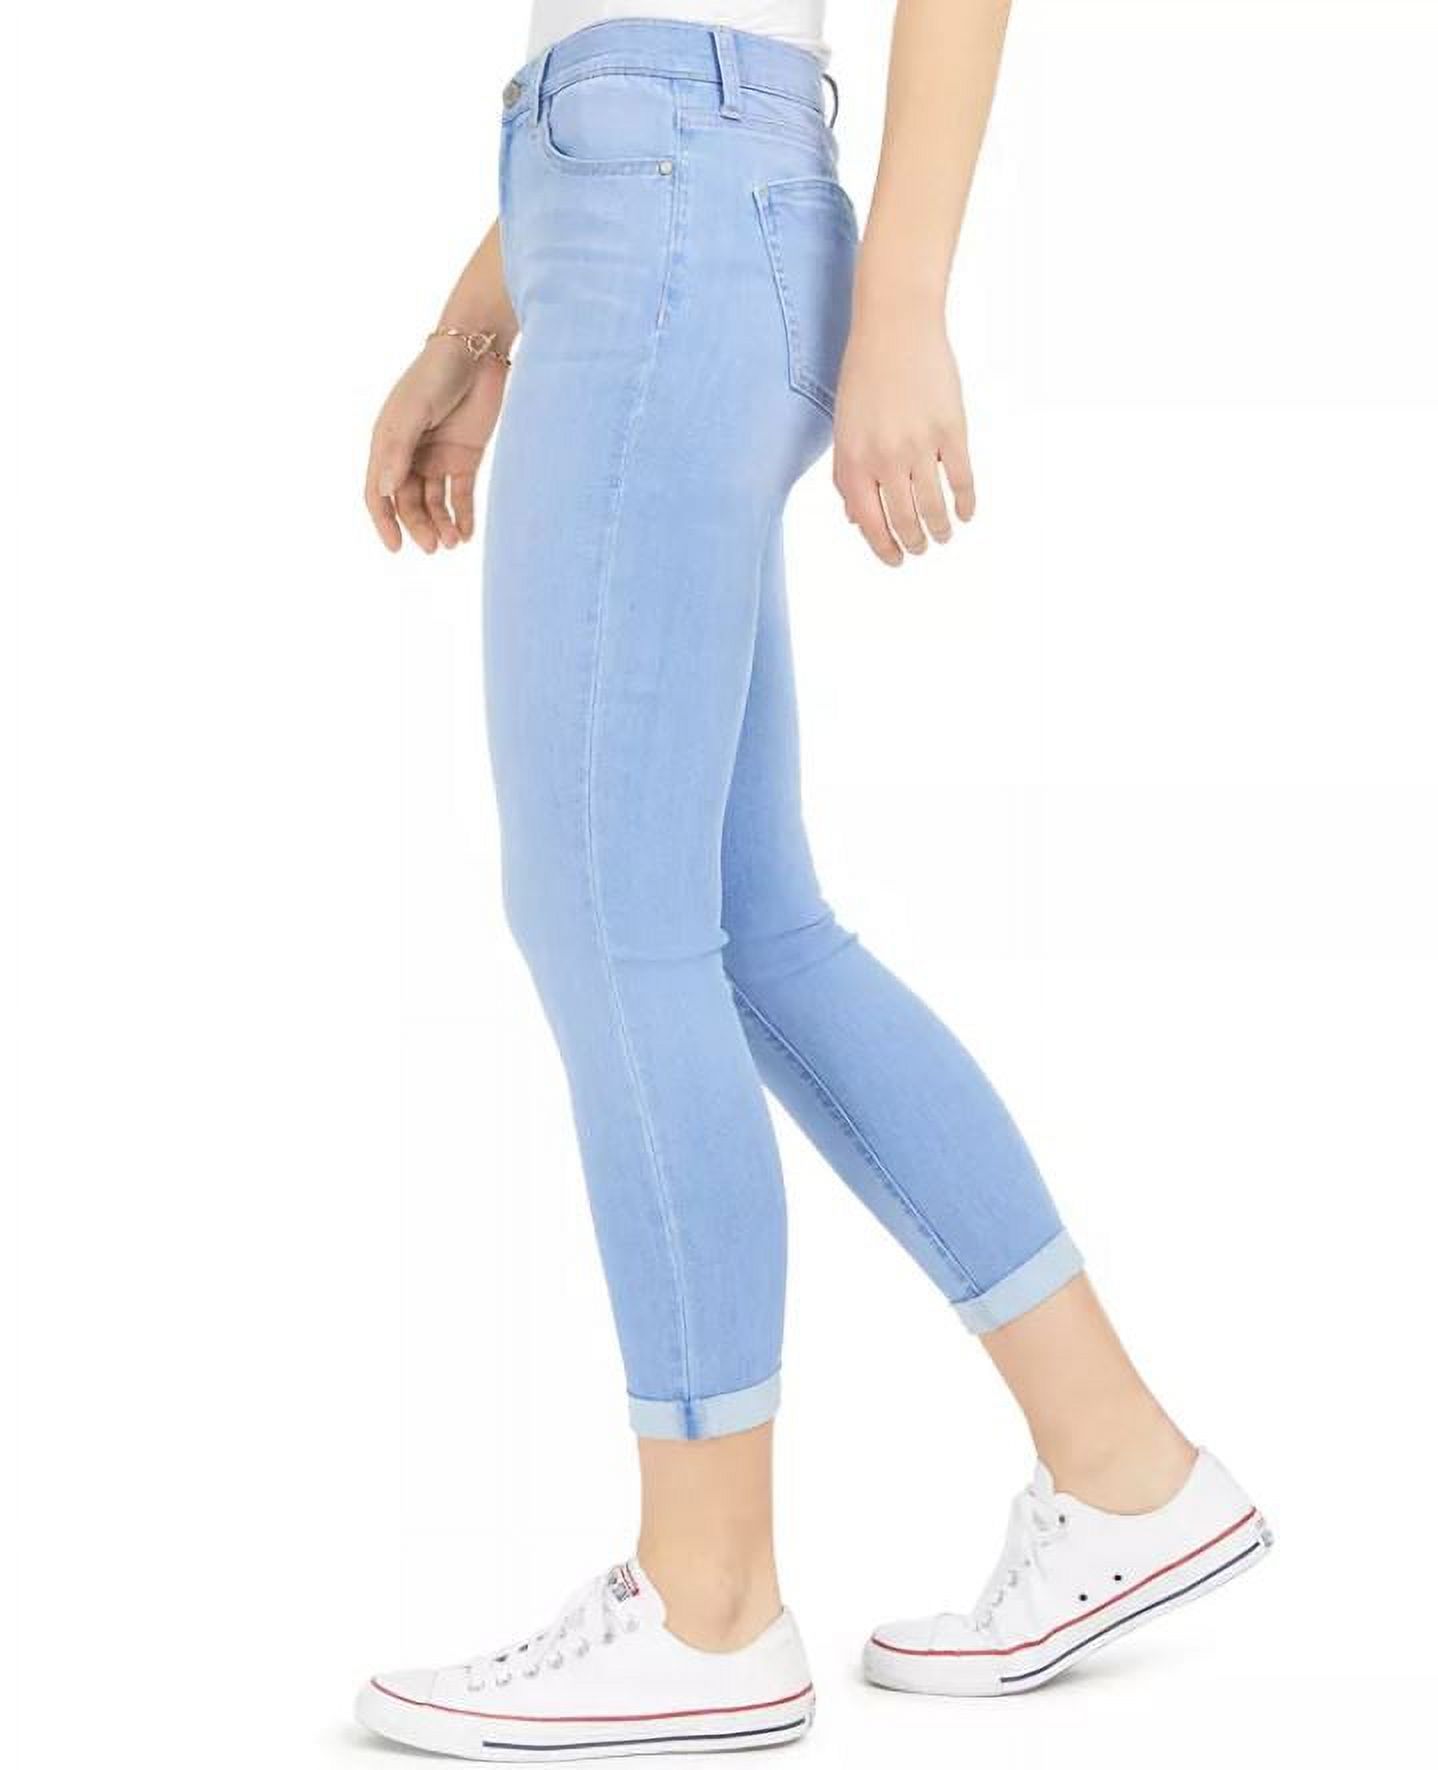 Celebrity Pink Girl's Blue Curvy Cuffed High-Rise Cropped Jeans, 0/24 - image 3 of 5